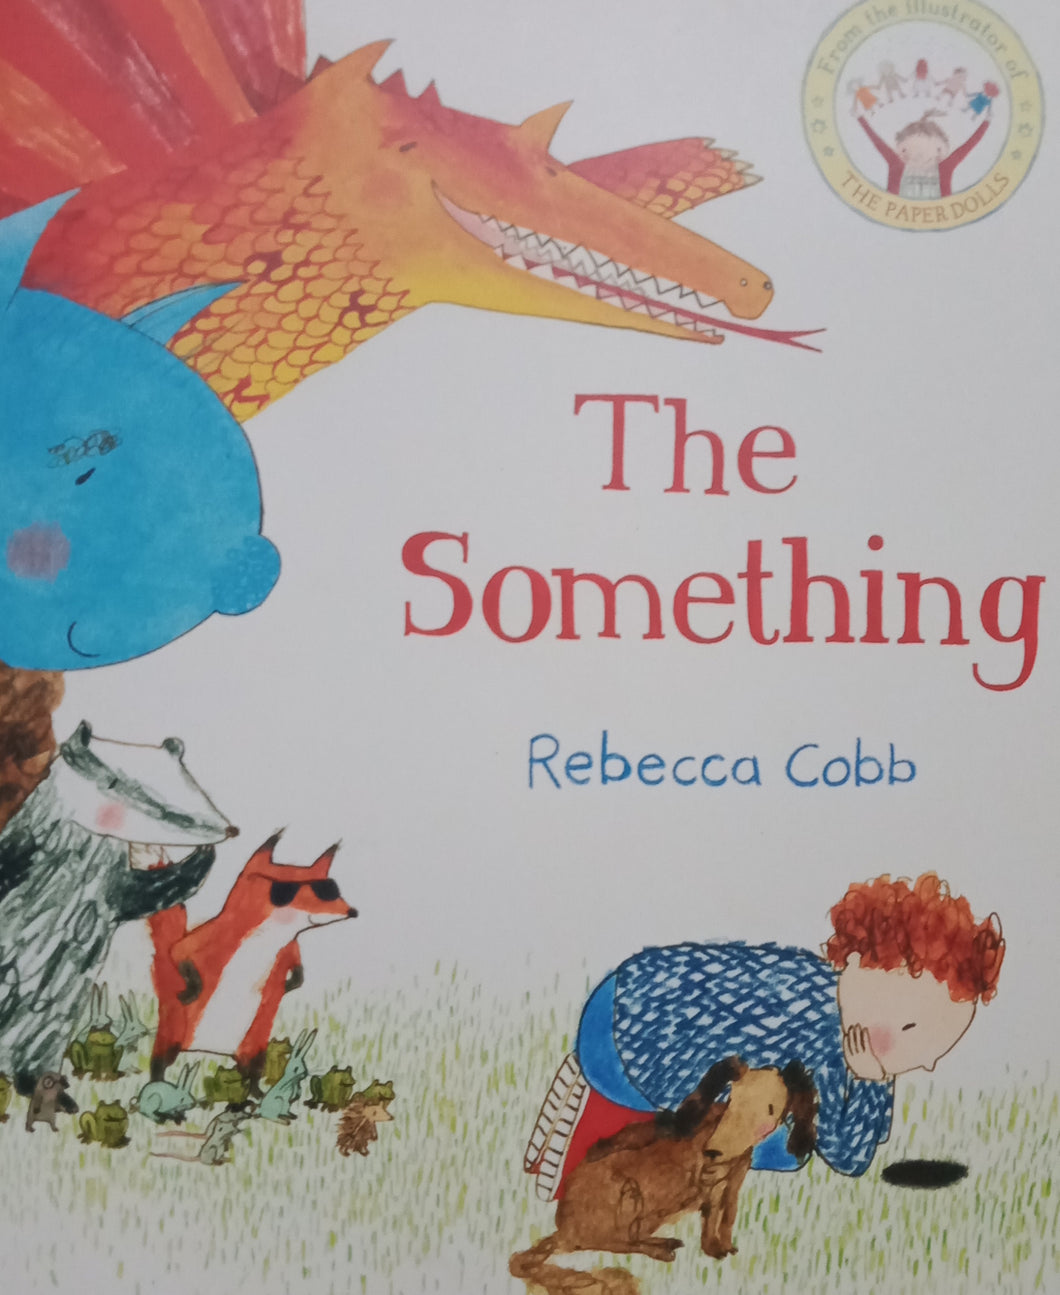 The Something by Rebecca Cobb